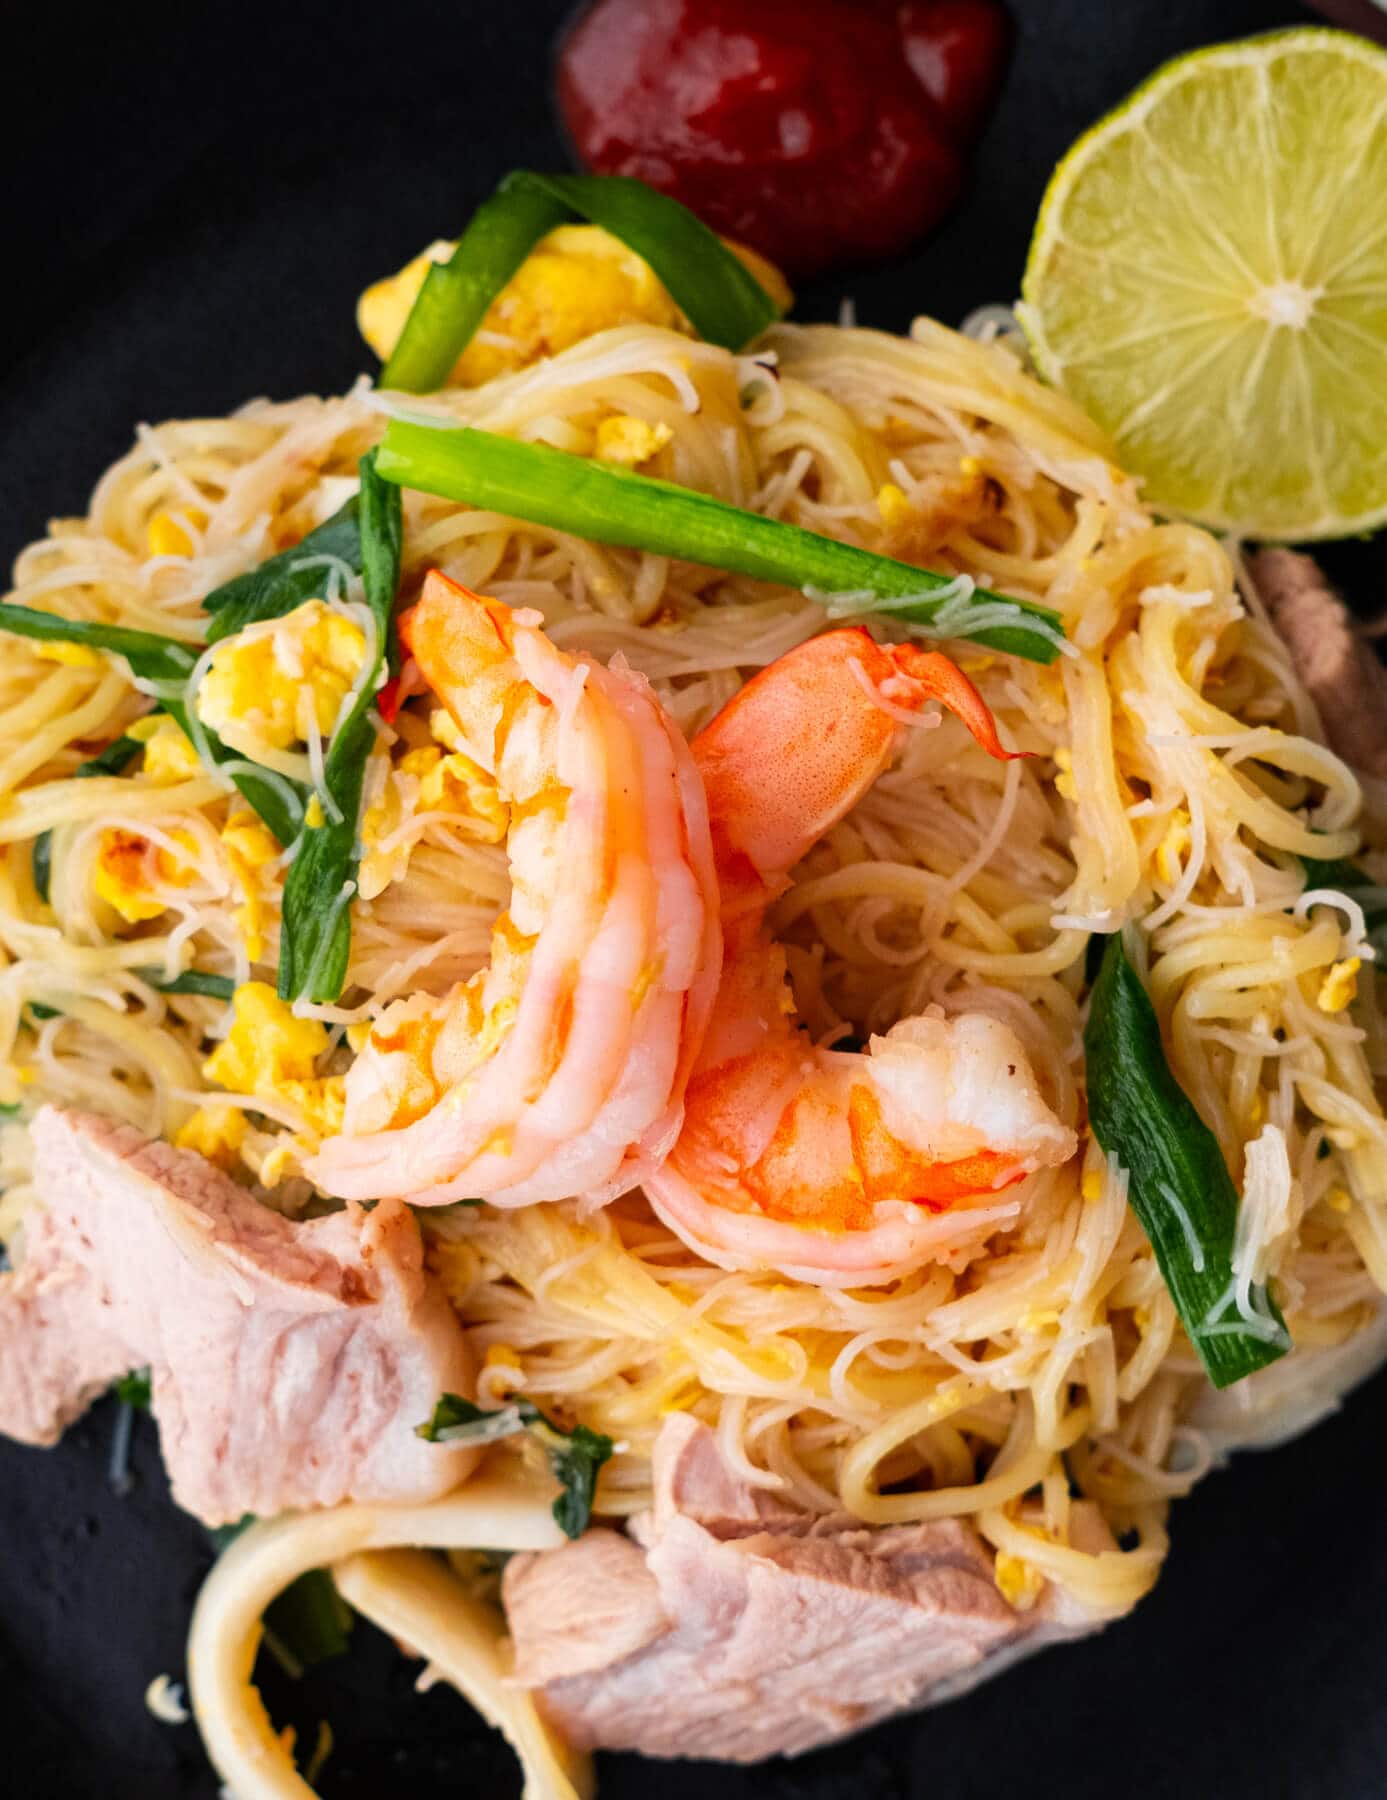 Singapore Hokkien Mee recipe - The prawn stock imparts the essence to the noodle and is the key ingredient that makes the bland-looking dish flavourful.